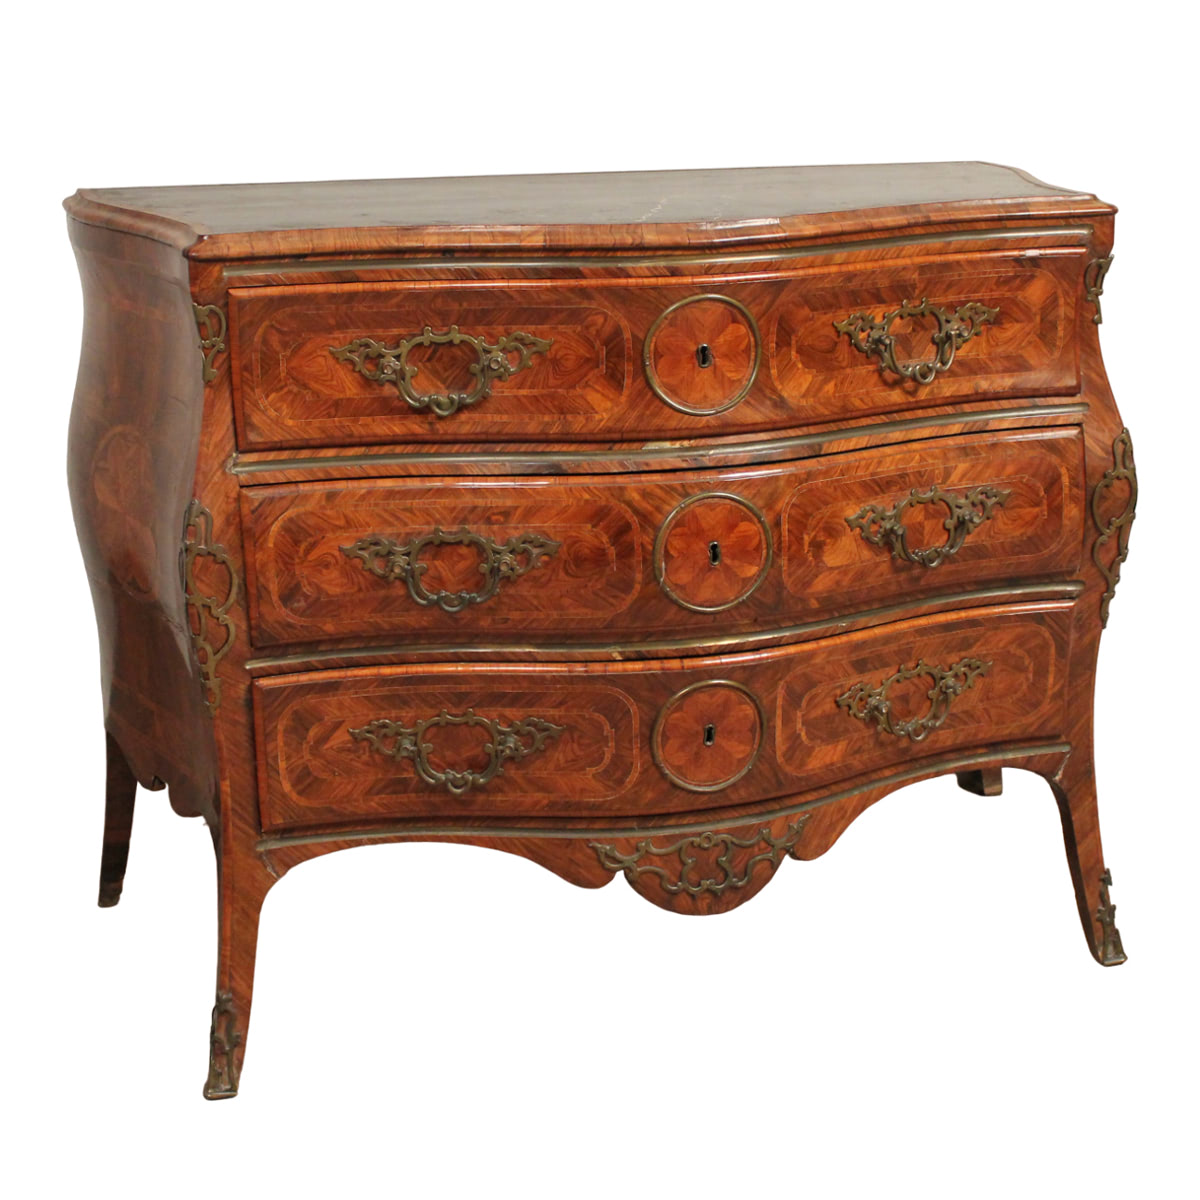 Importante cassettone a tre cassetti - Important chest of drawers with three drawers